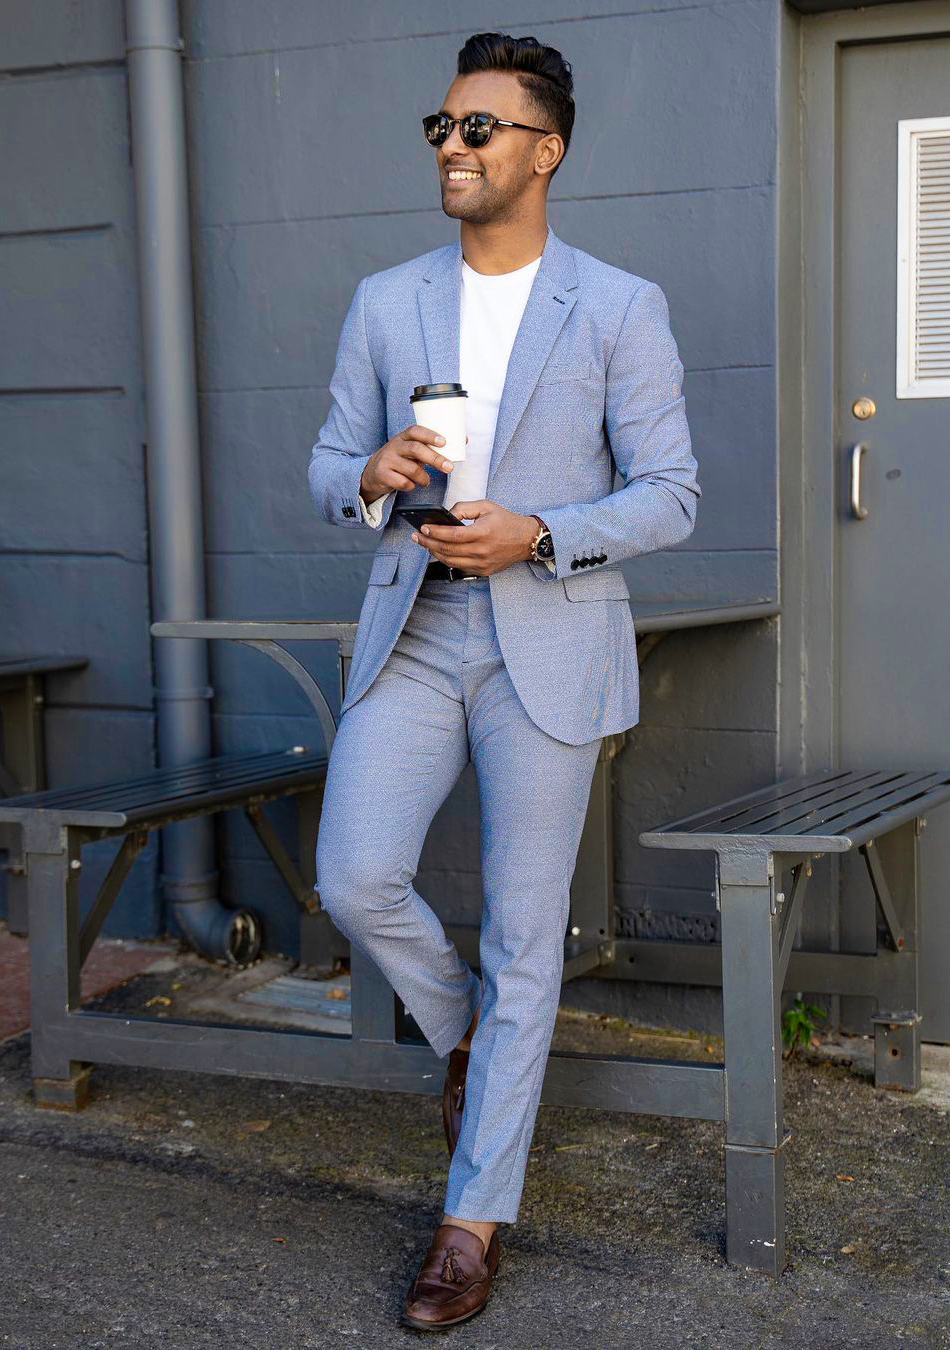 Light blue suit, white t-shirt, and dark brown loafers